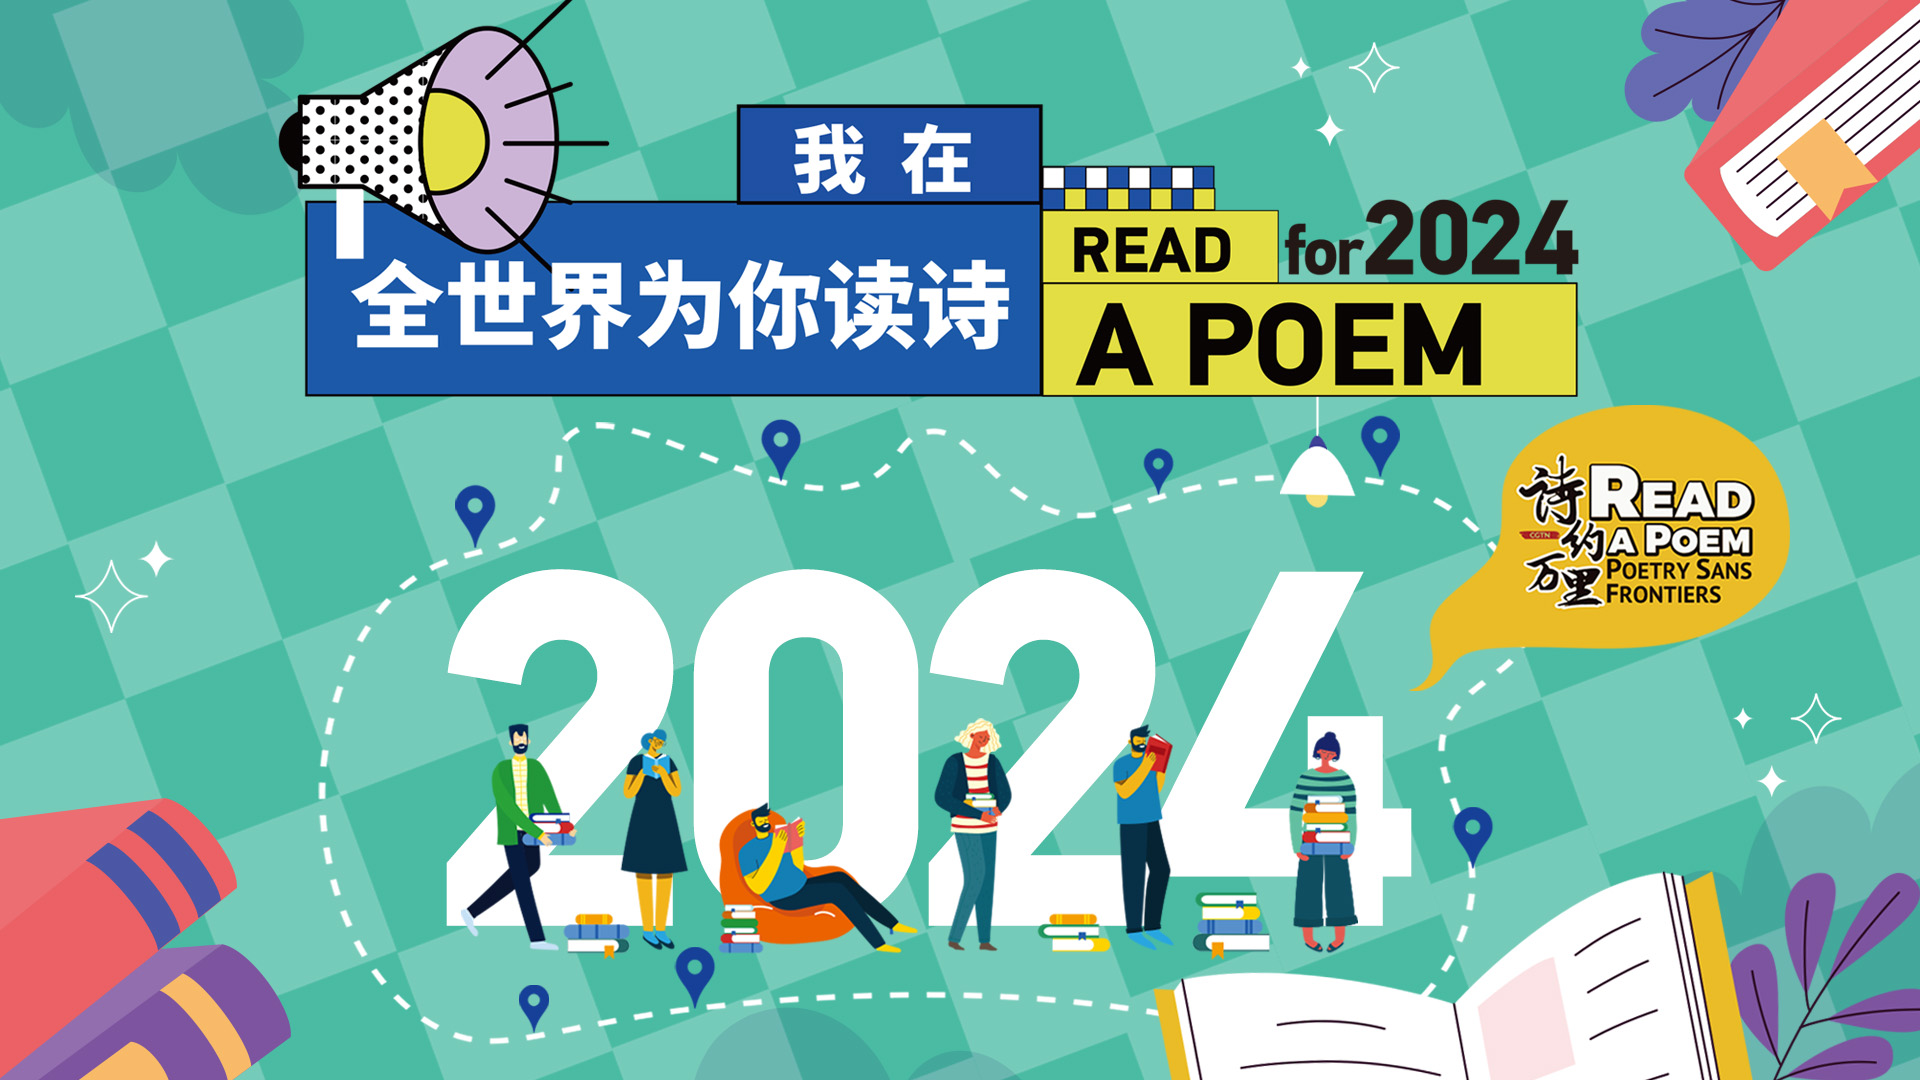 Live: Read a poem for 2024